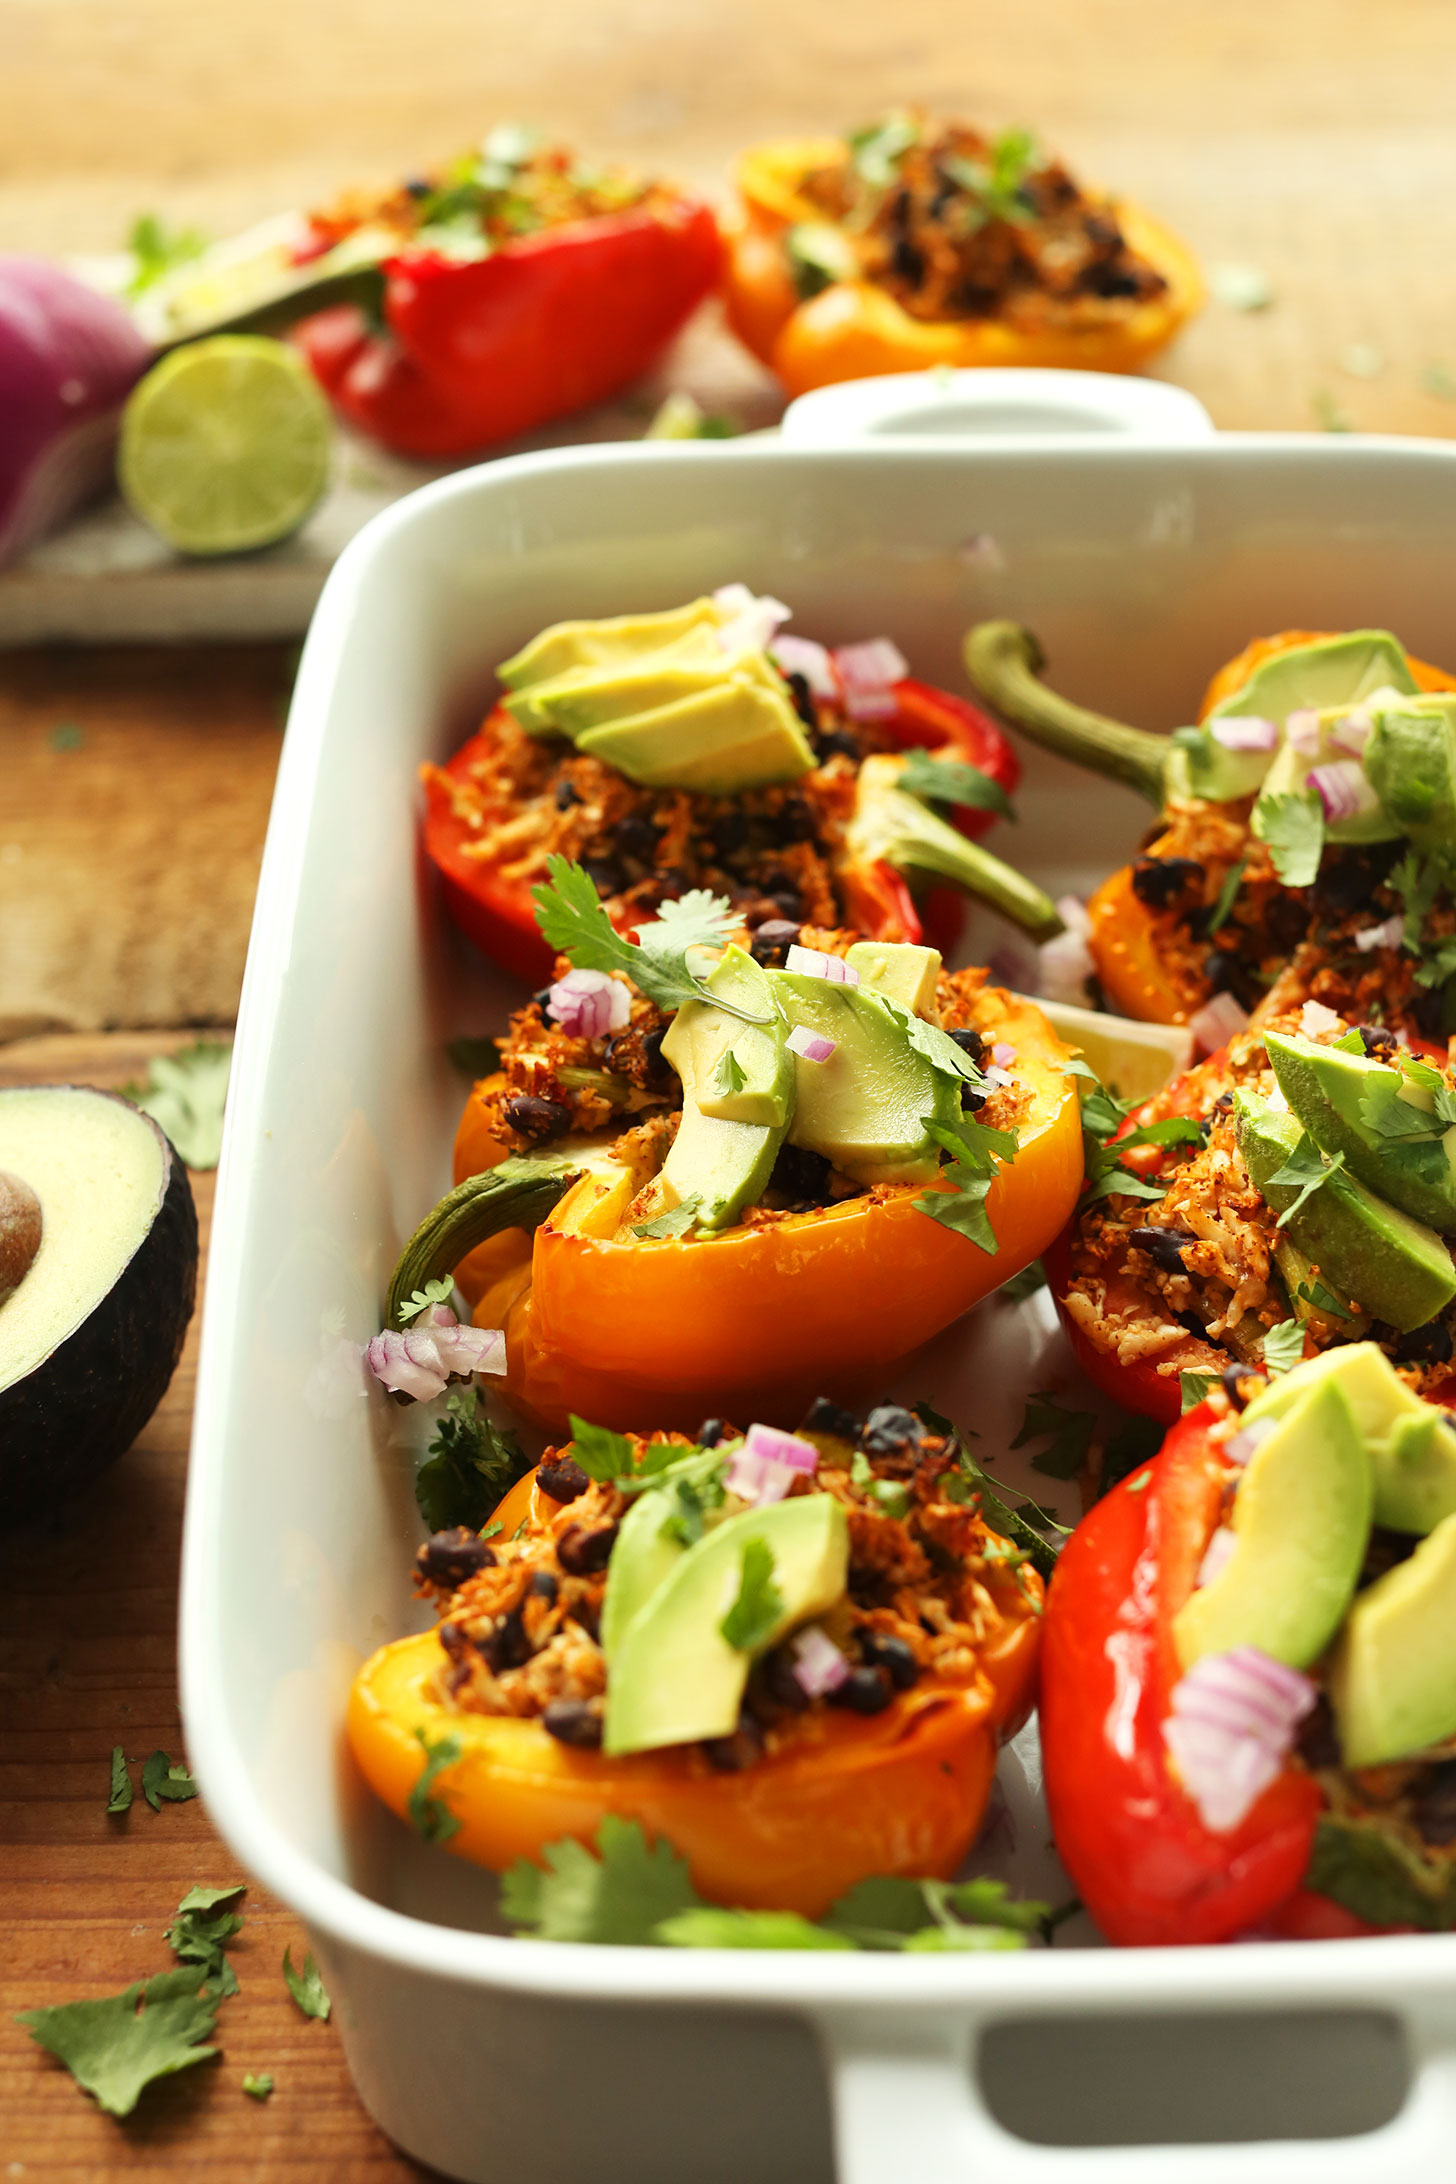 Mexican Cauliflower Rice Stuffed Peppers topped with red onion, cilantro, and fresh avocado